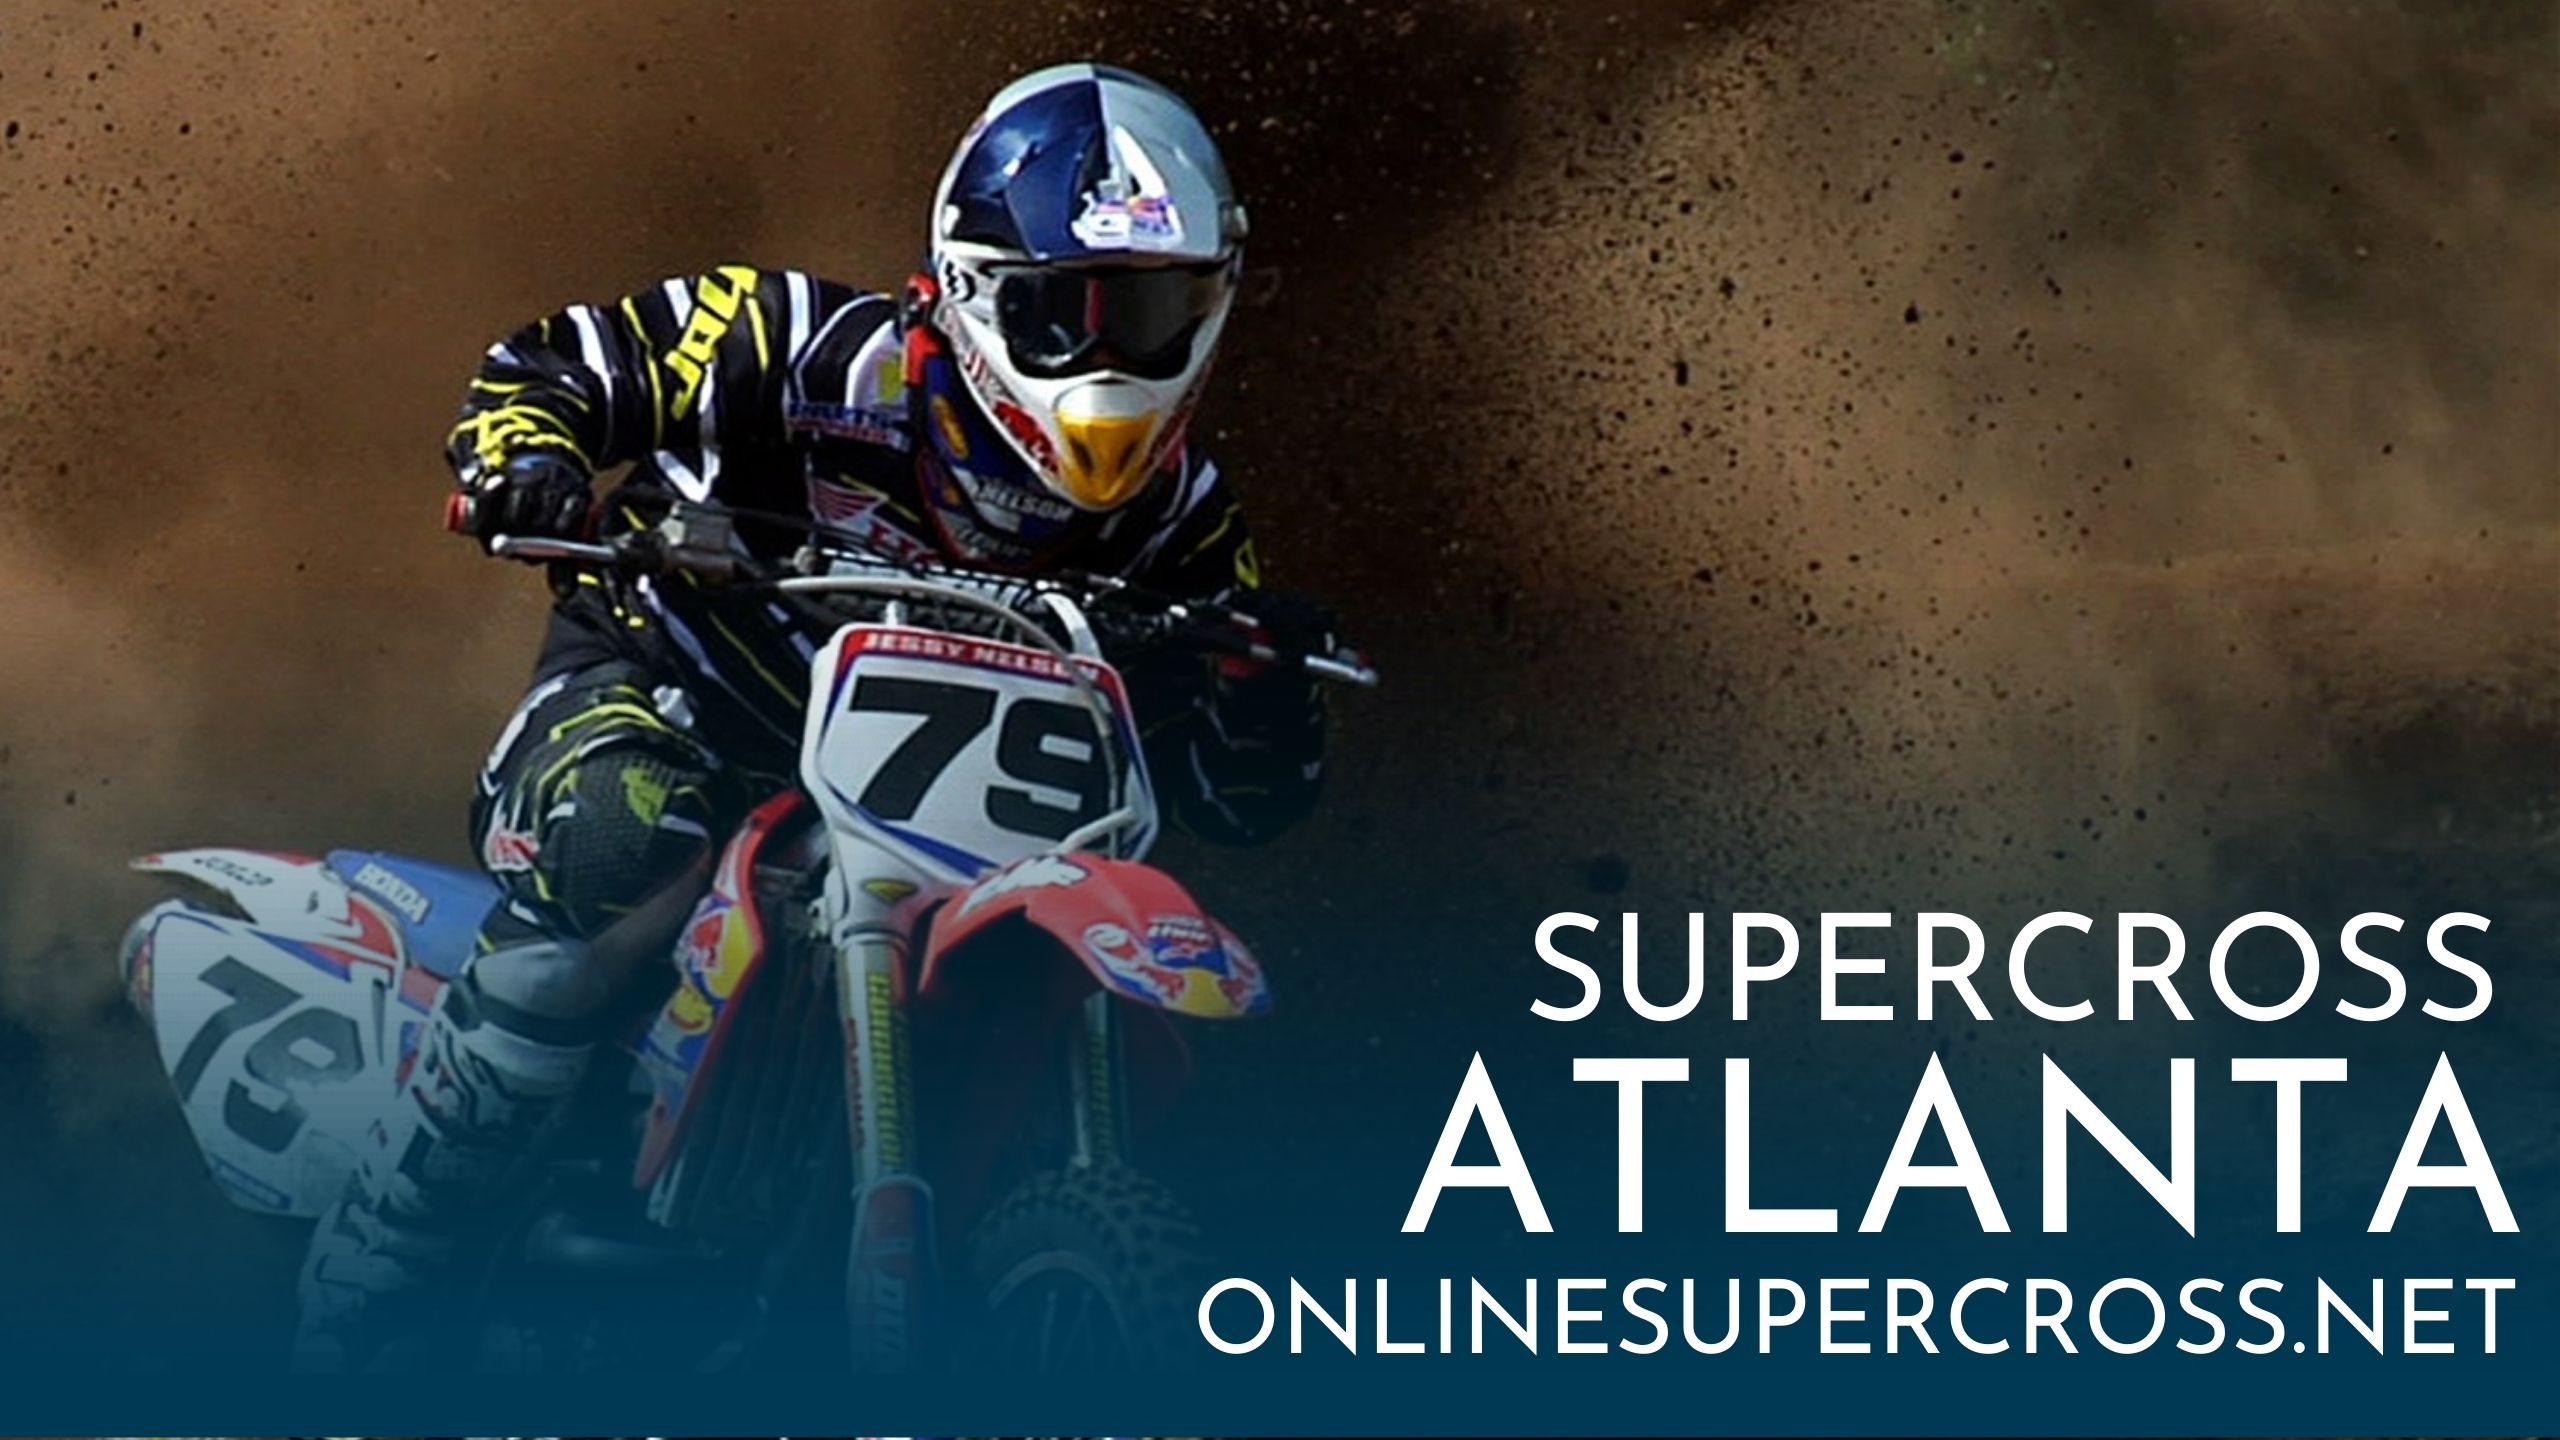 2016 Race East Rutherford AMA Supercross